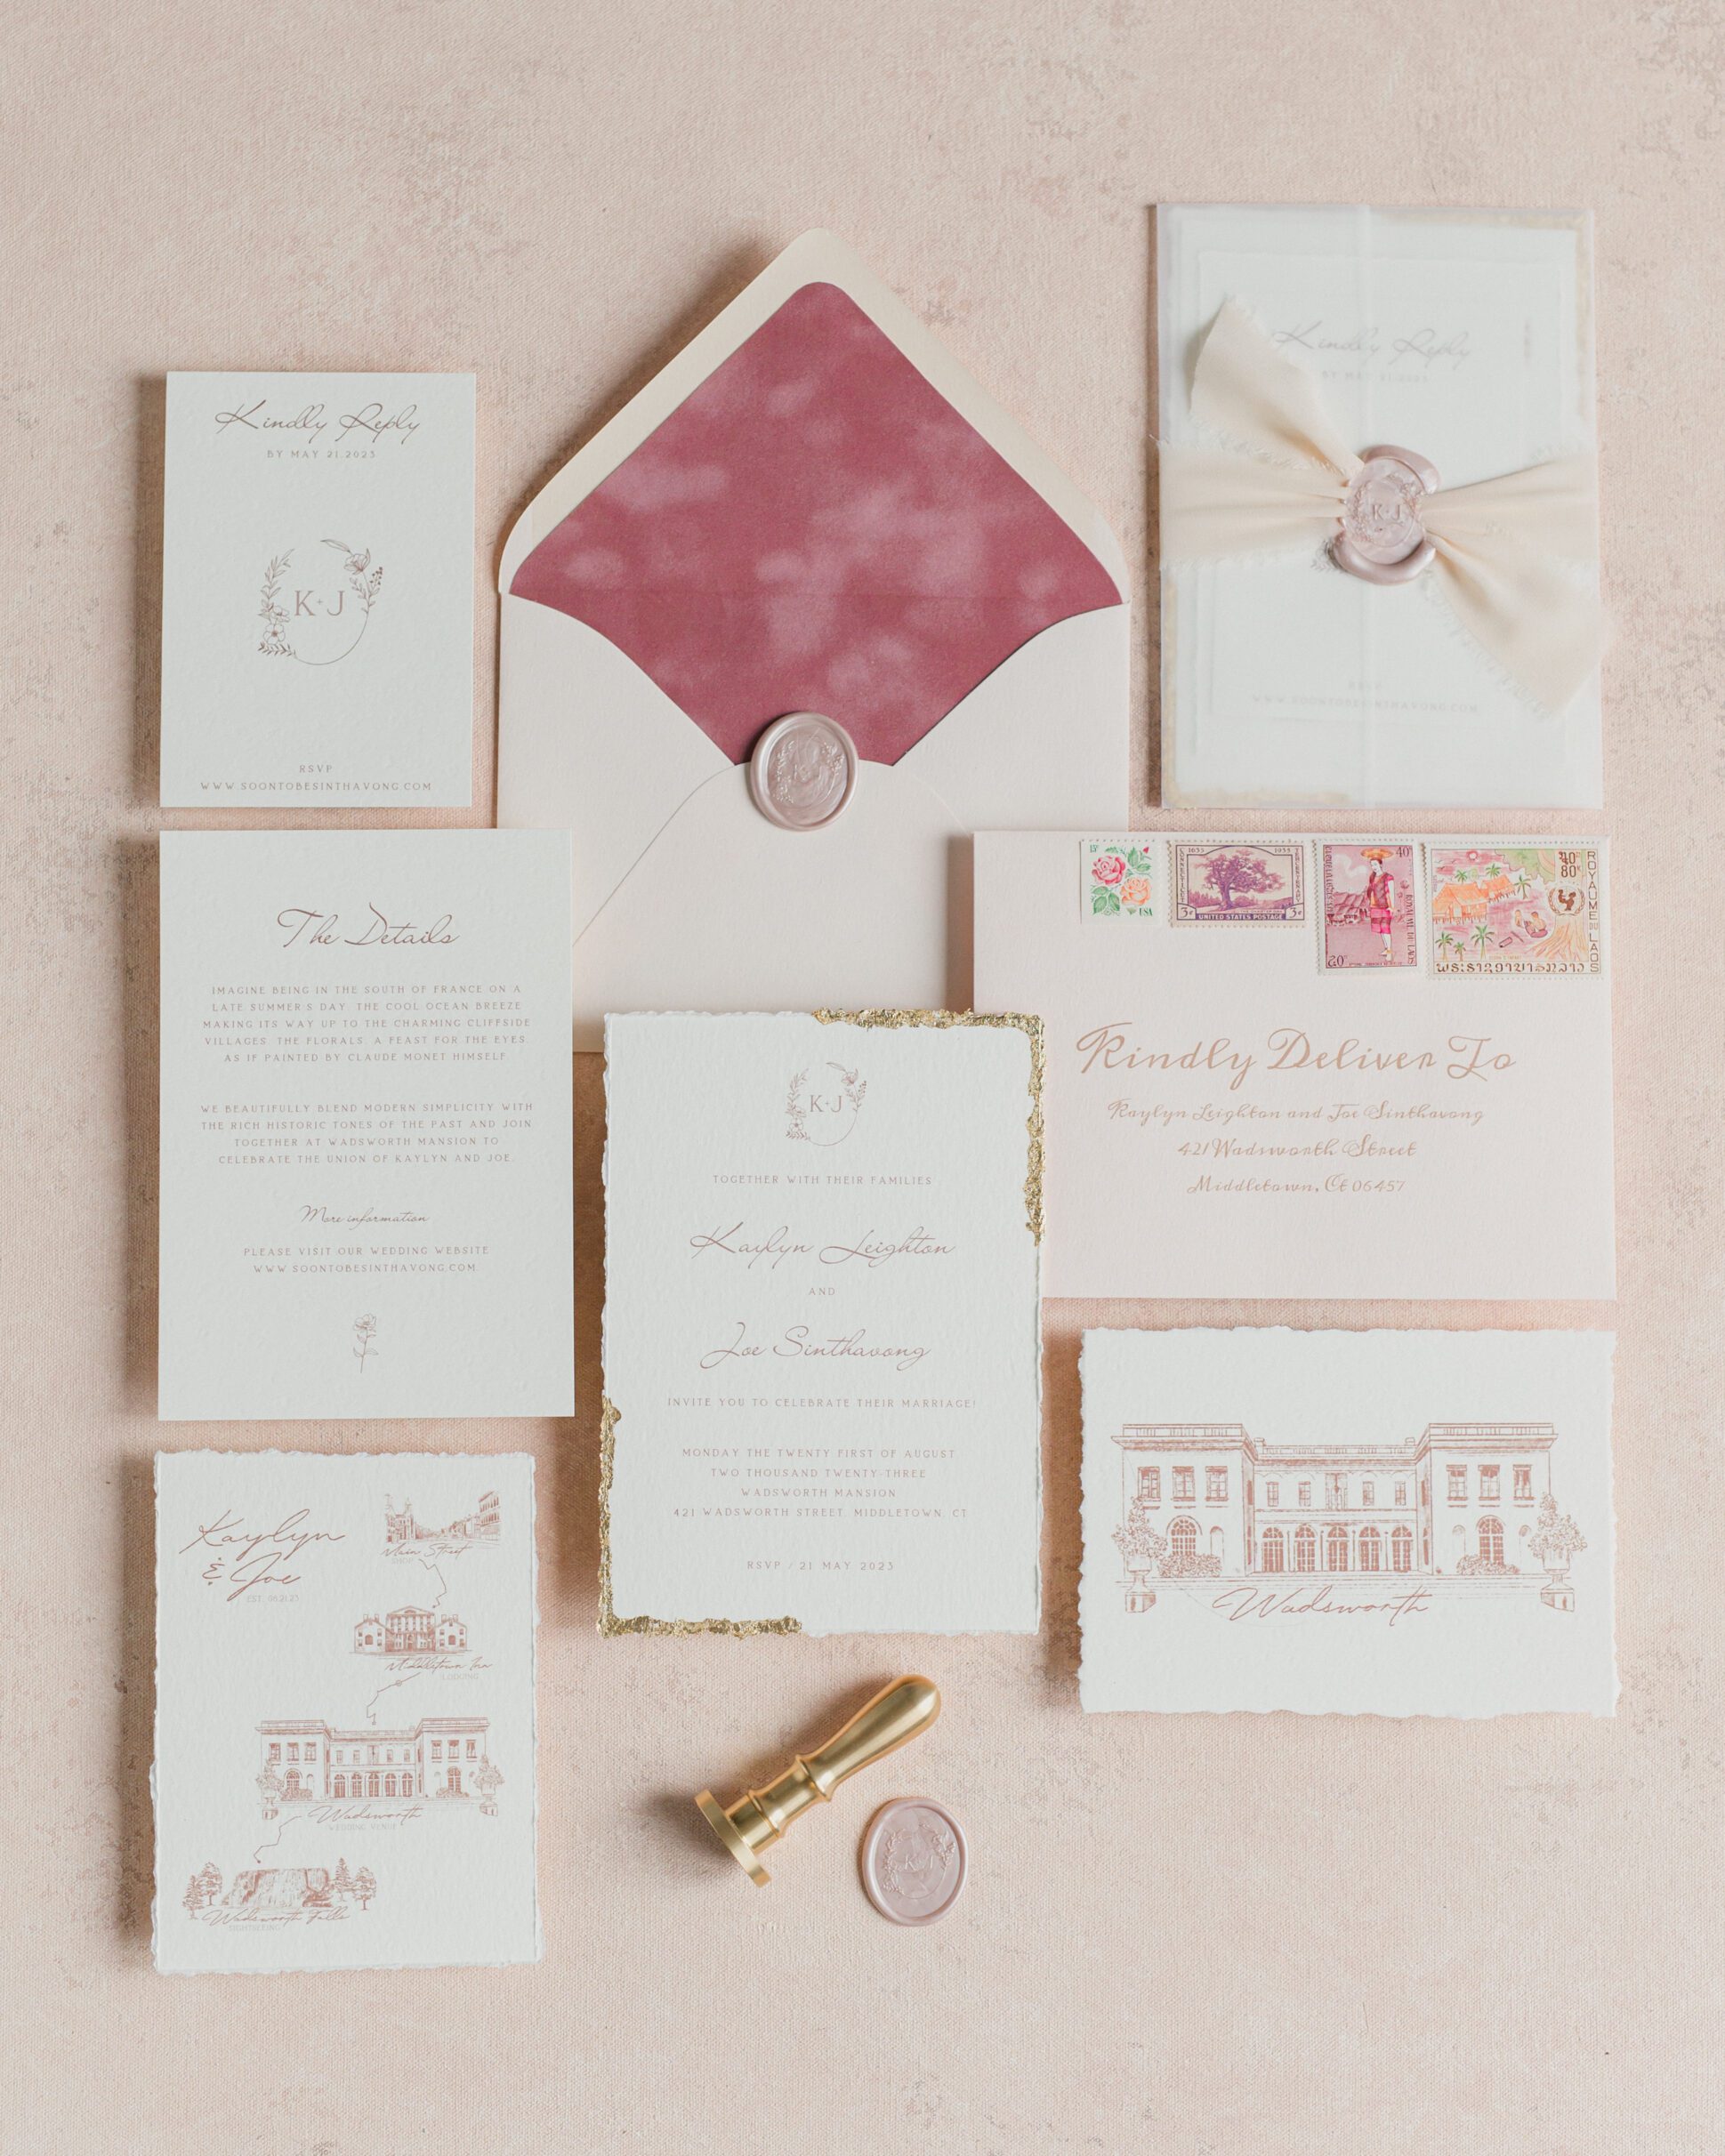 our wedding featured on the knot at wadsworth mansion with hand crafted wedding stationary 